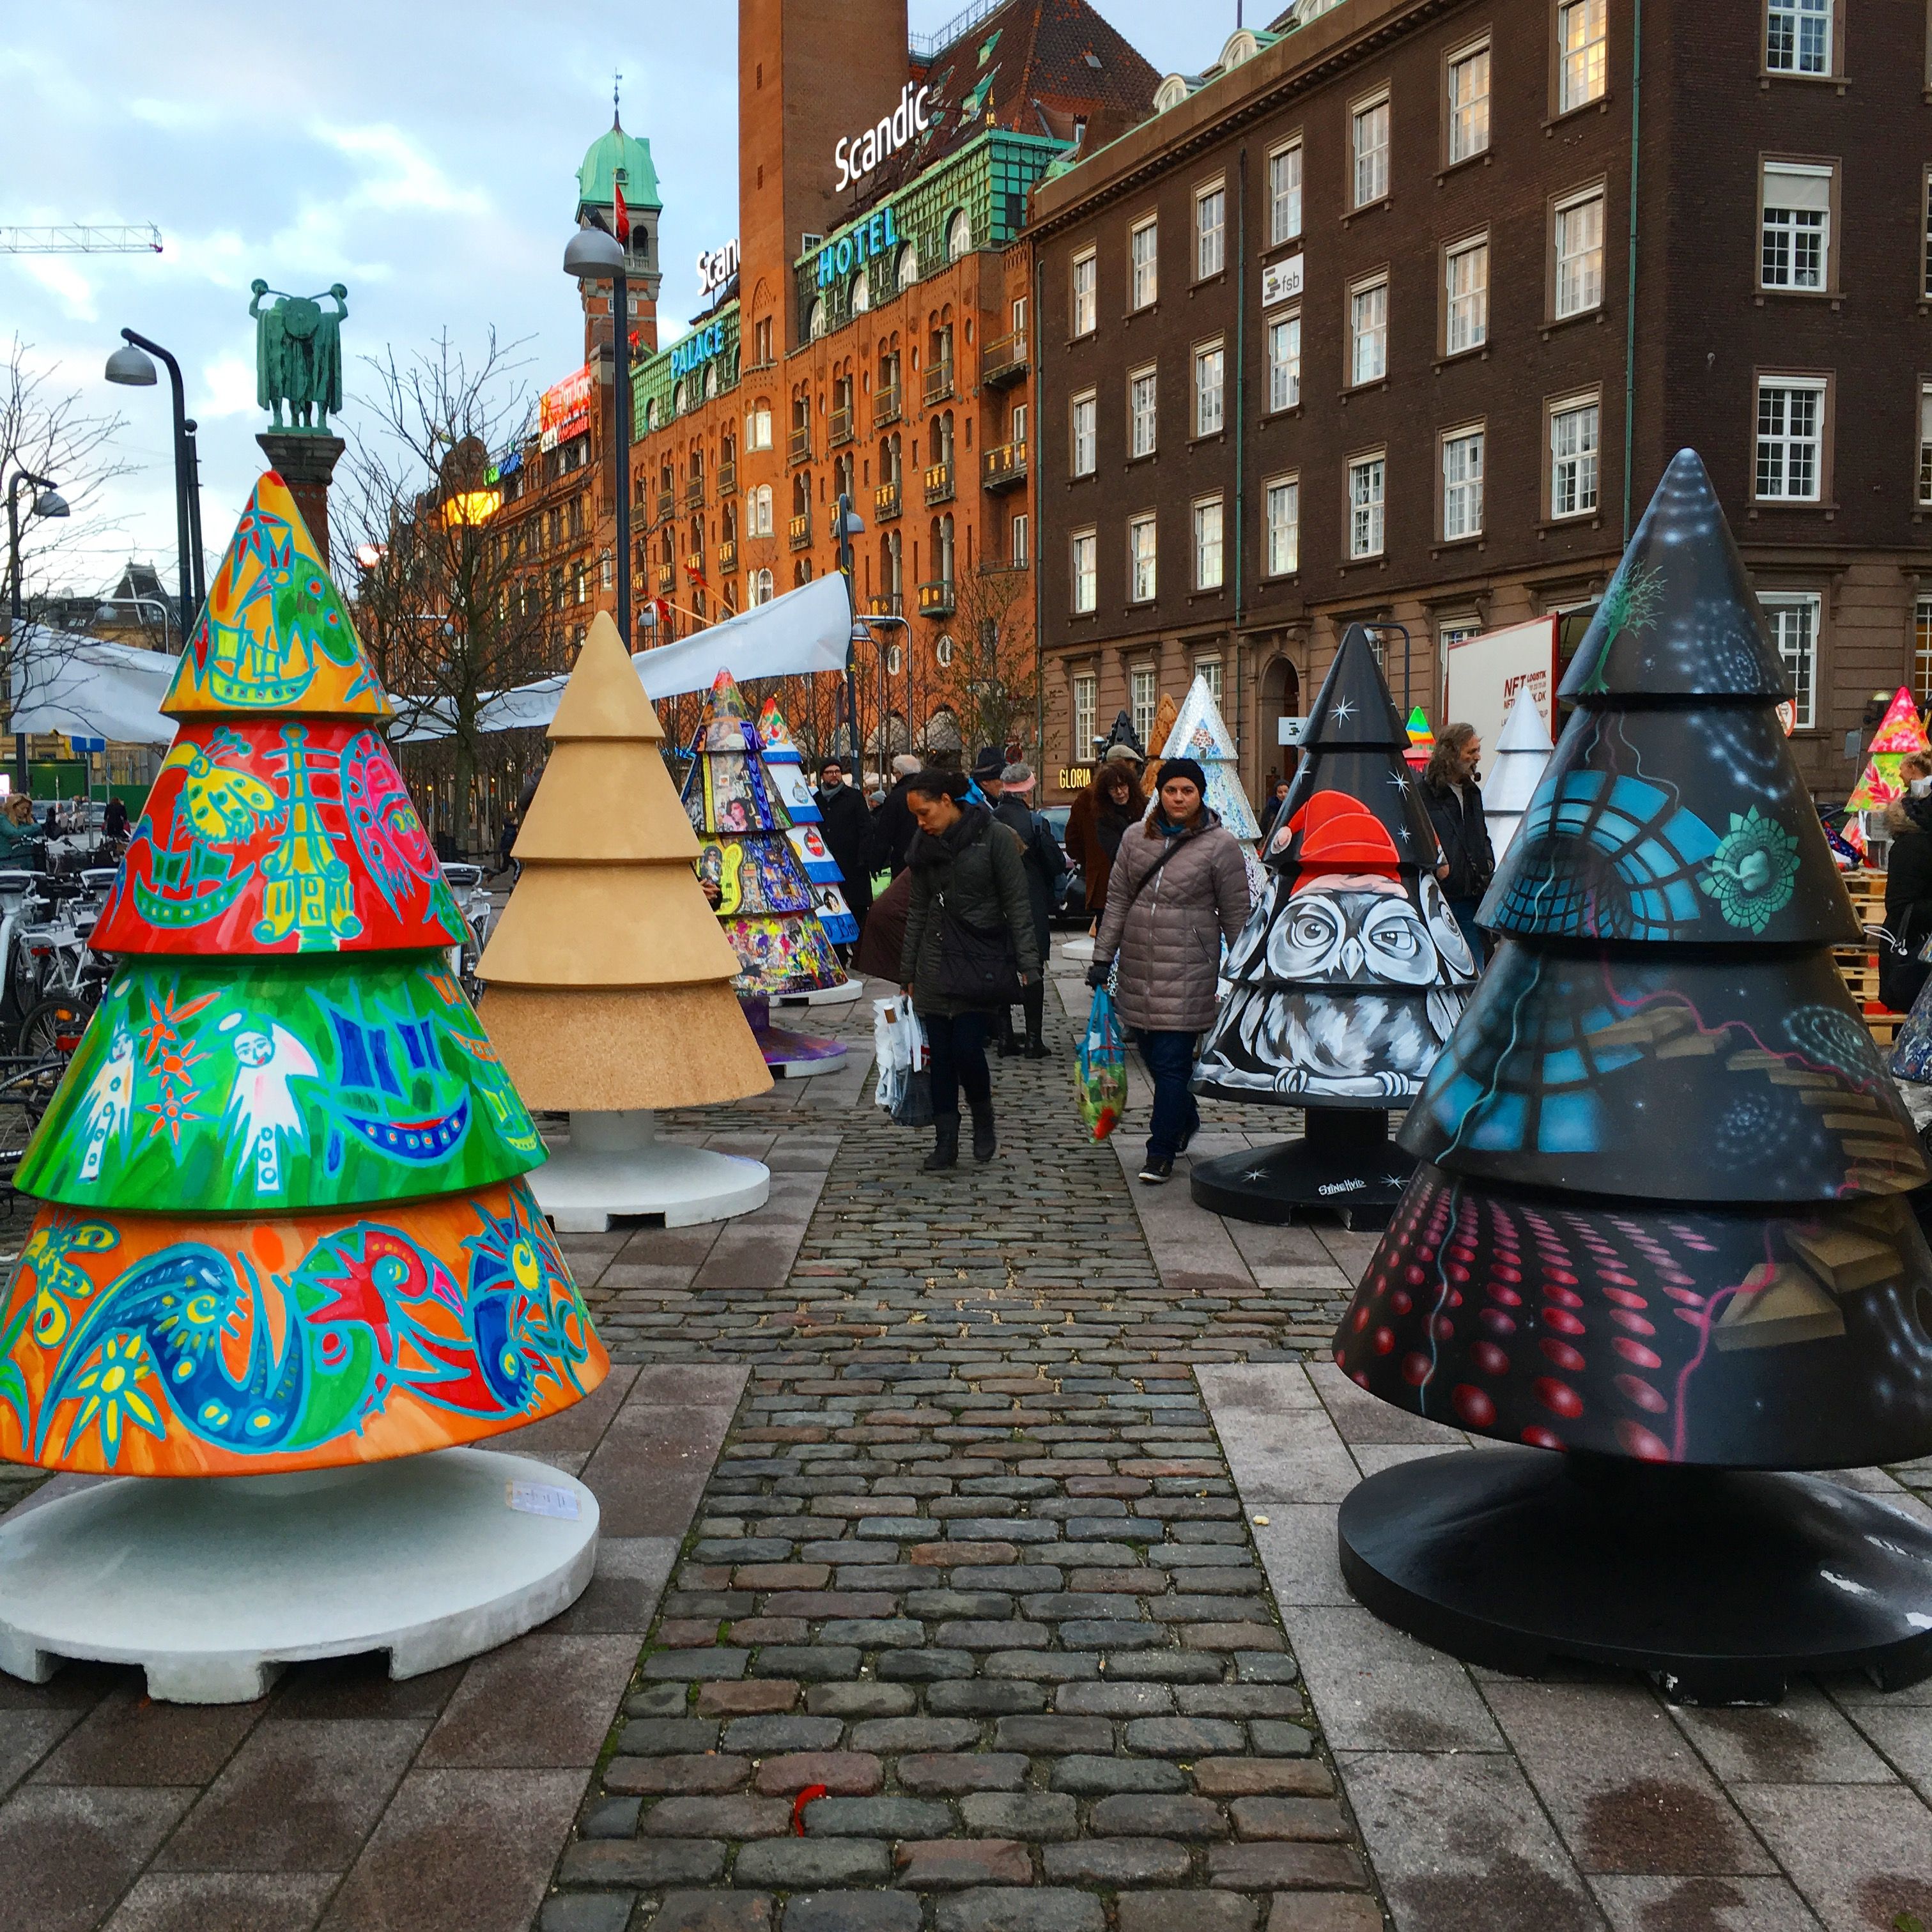 Christmas trees sprouting up in the middle of Strøget